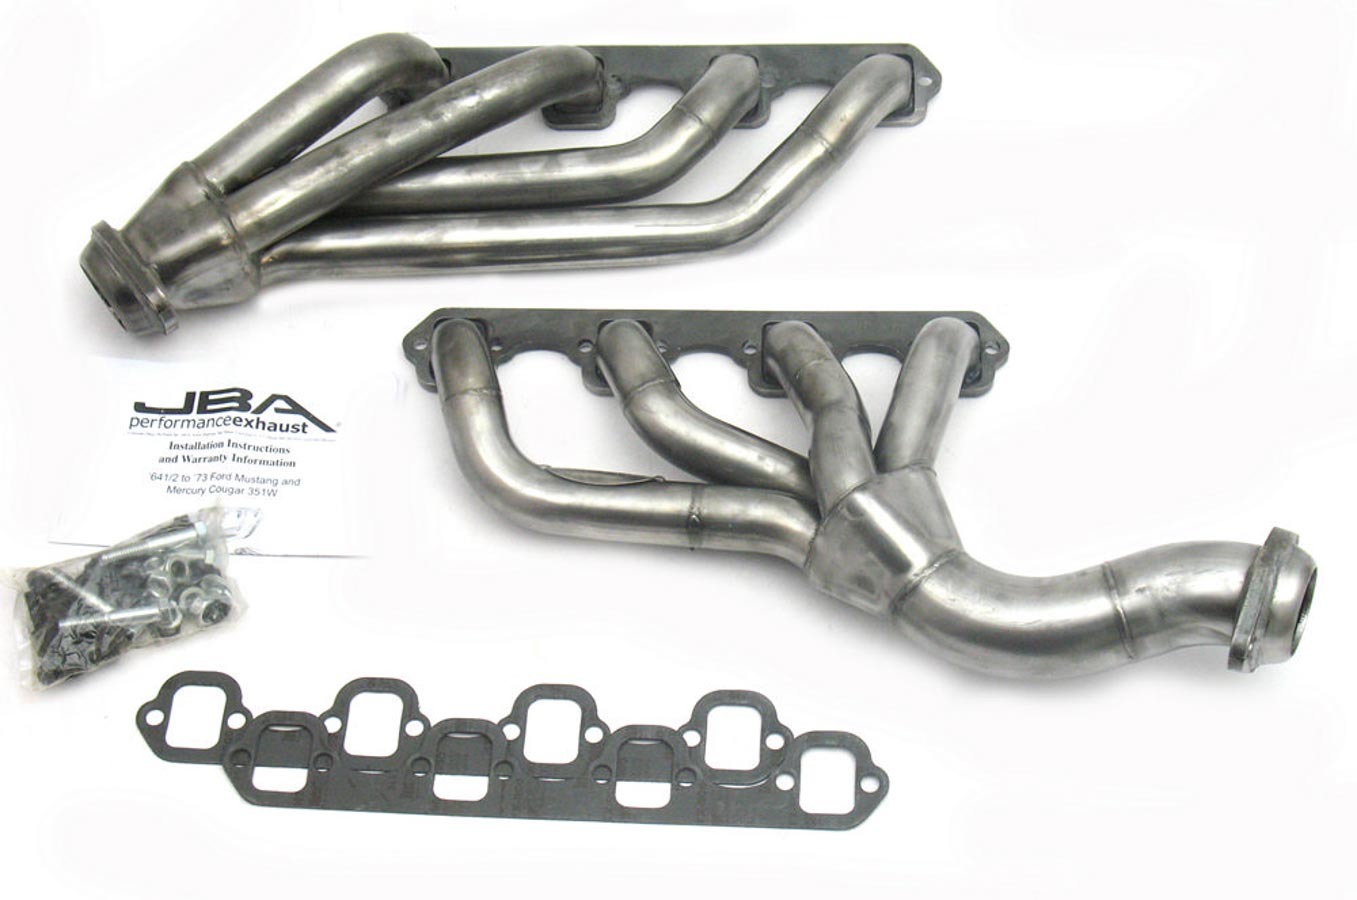 JBA Exhaust 1655S Headers, Cat4ward, 1-5/8 in Primary, 2-1/2 in Collector, Stainless, Natural, Small Block Ford, Ford Mustang 1969-73, Pair